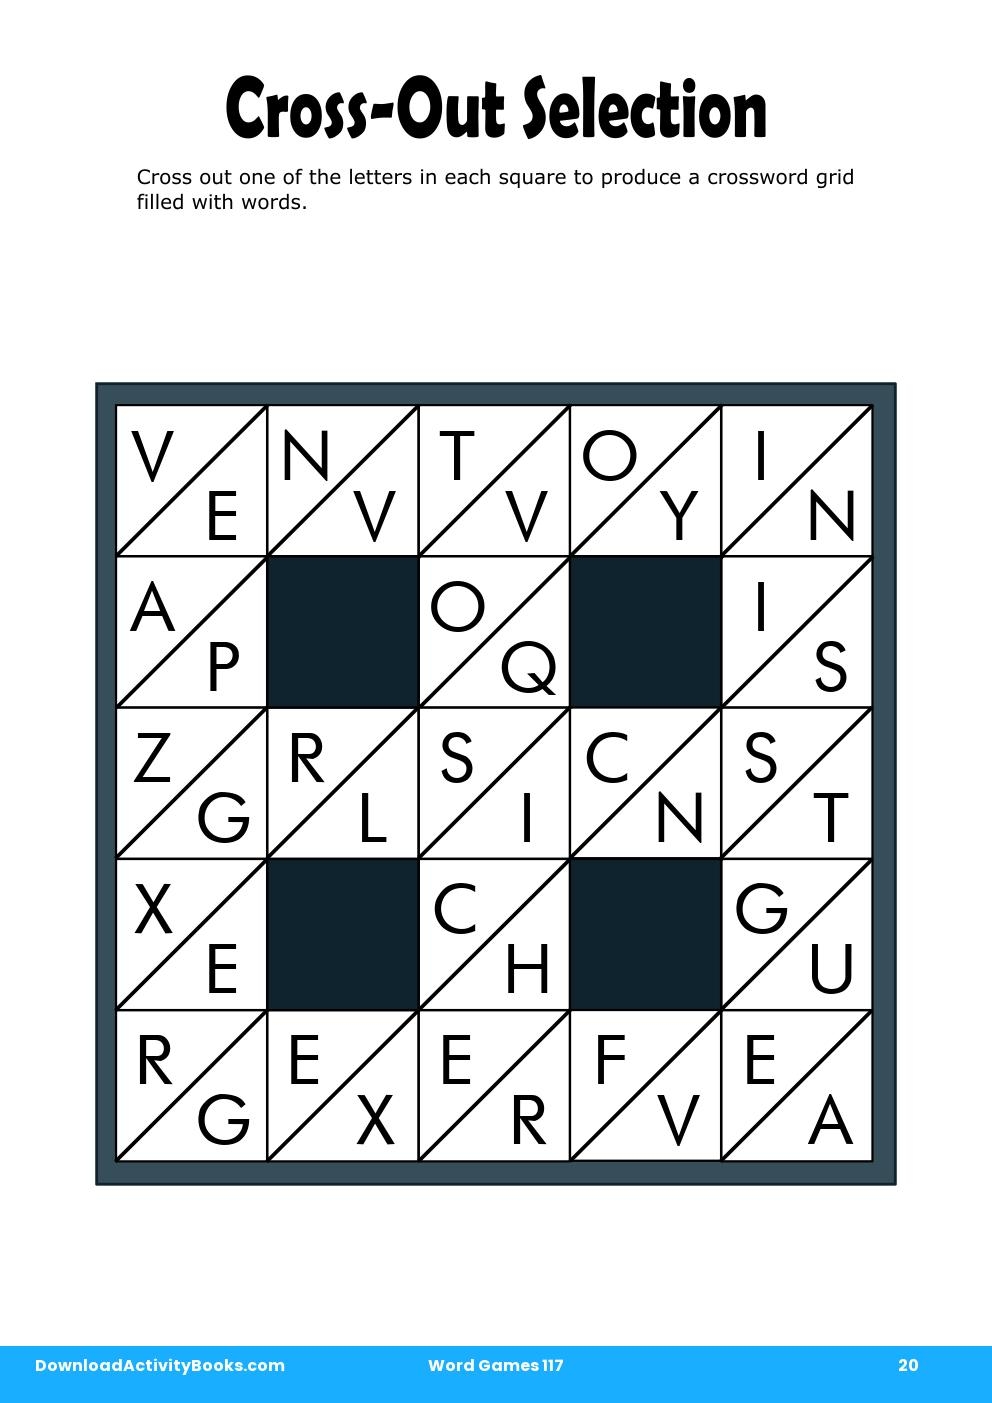 Cross-Out Selection in Word Games 117